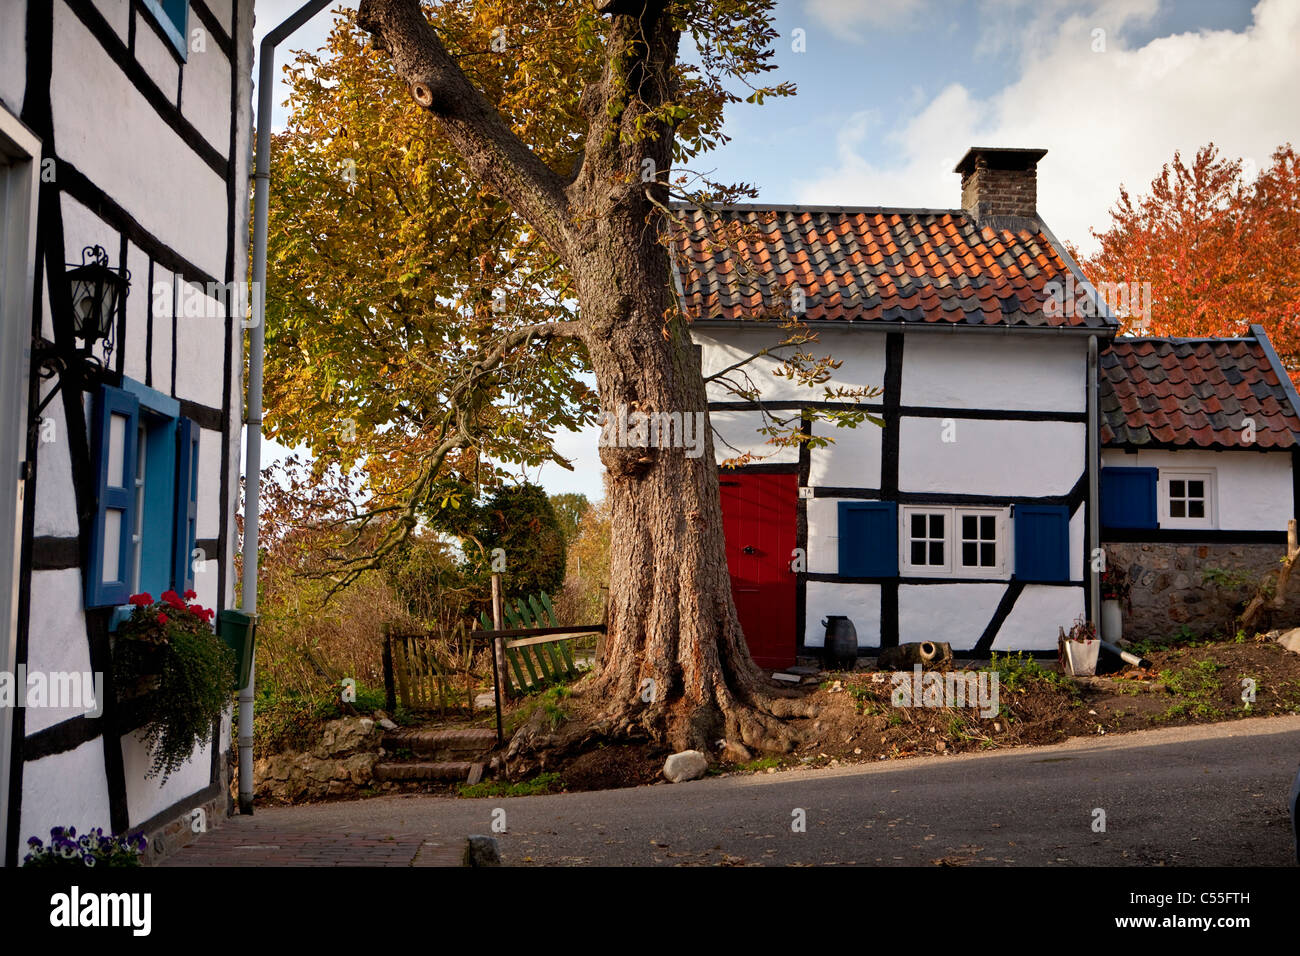 The Netherlands, Epen, Frame houses Stock Photo